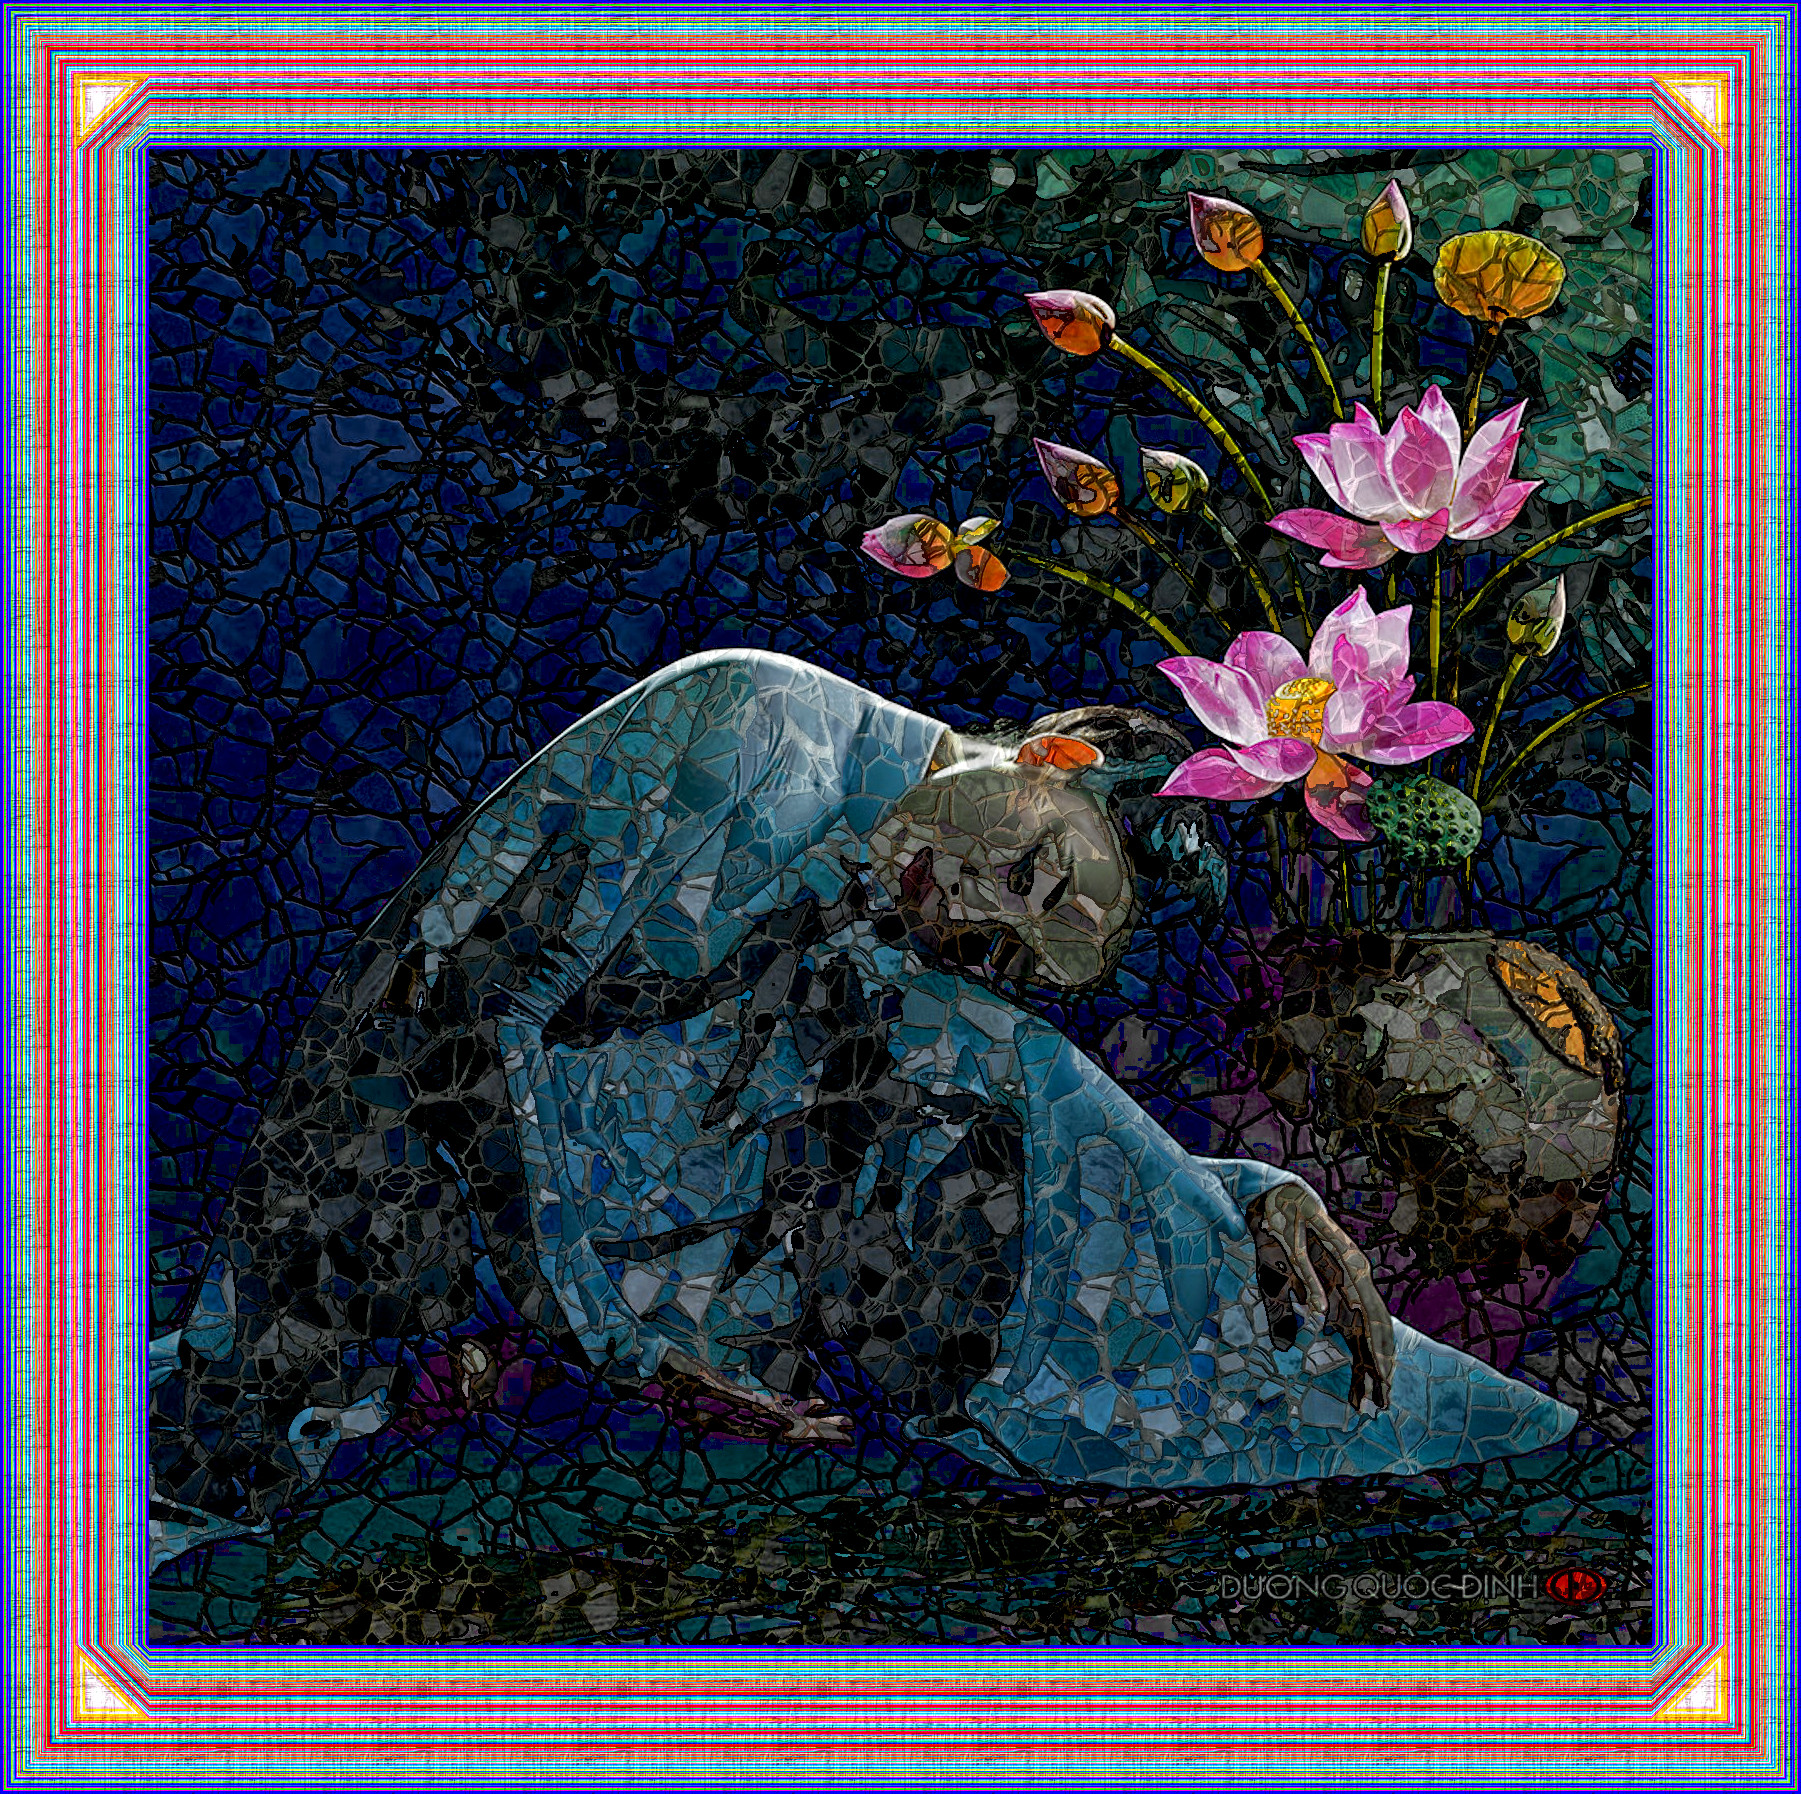 2019-04-13 06-56-06 4, as a simple stone mosaic, on 8 areas, over-stroked, framed.jpg